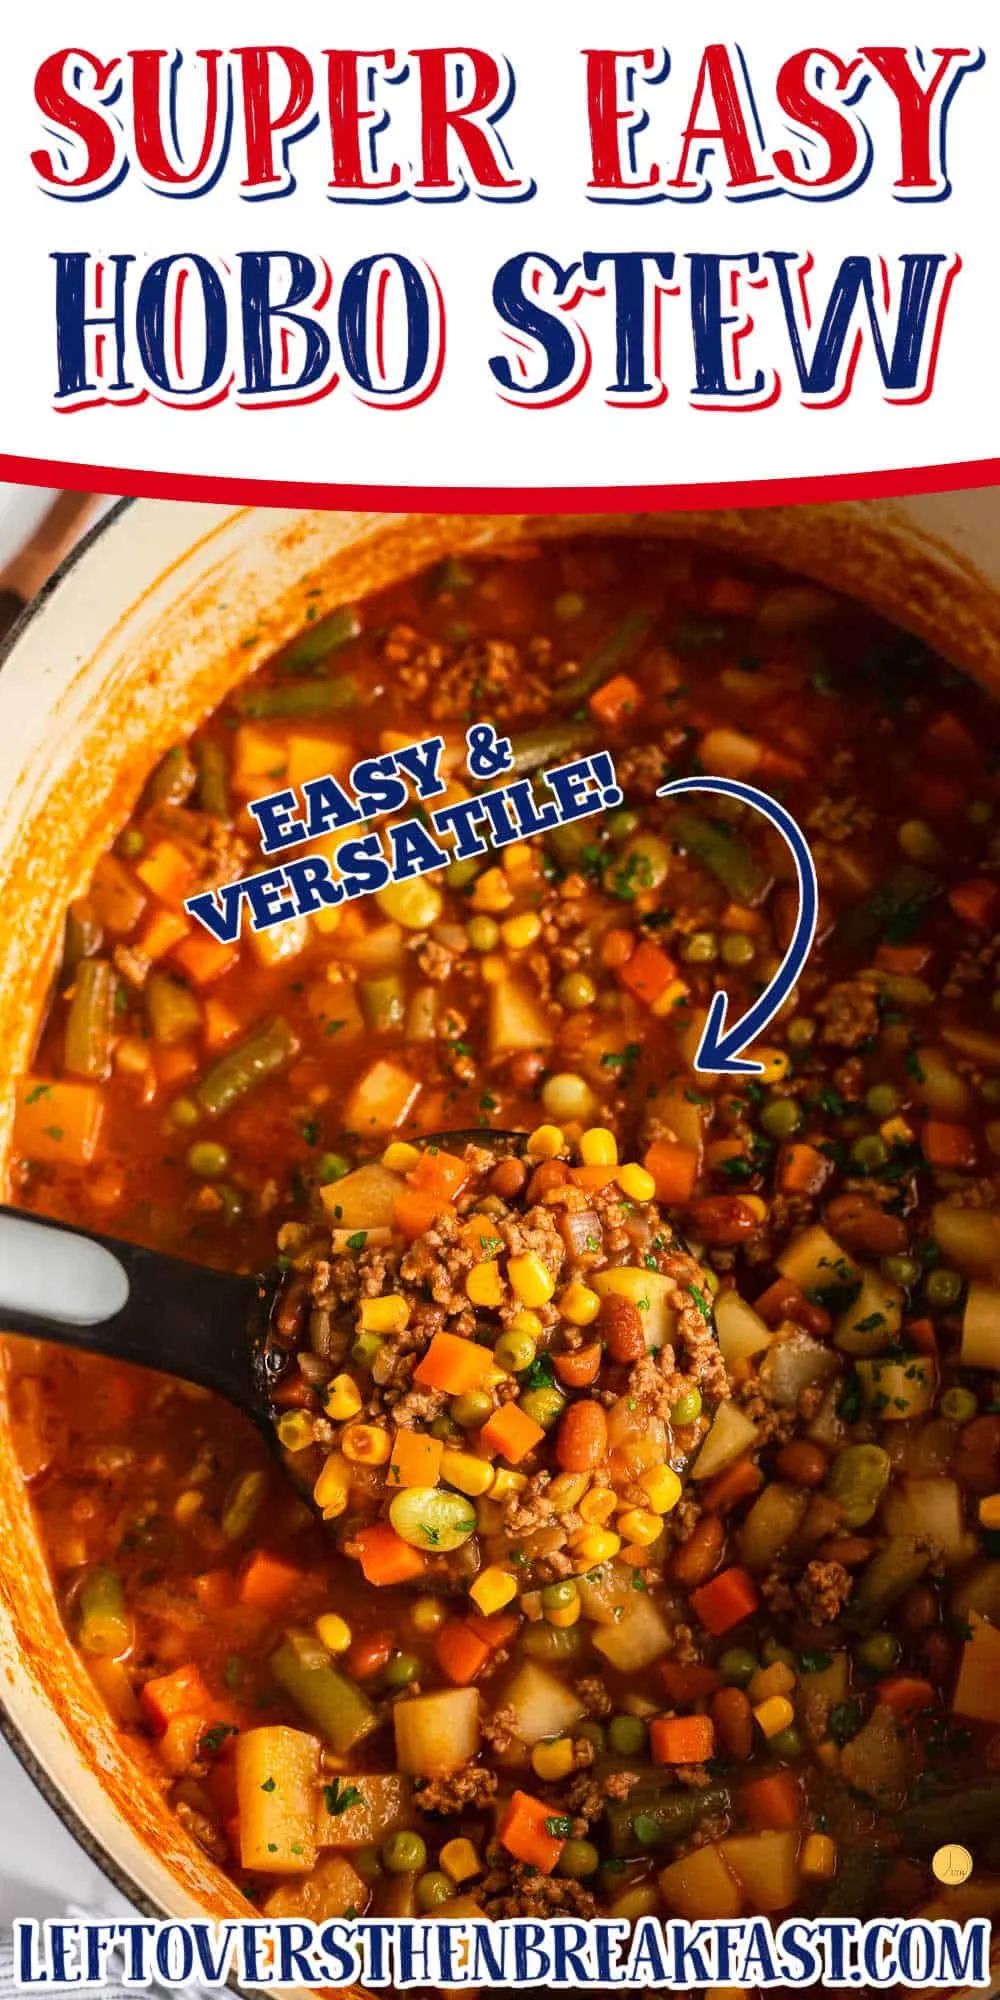 ladle of stew with text "super easy"